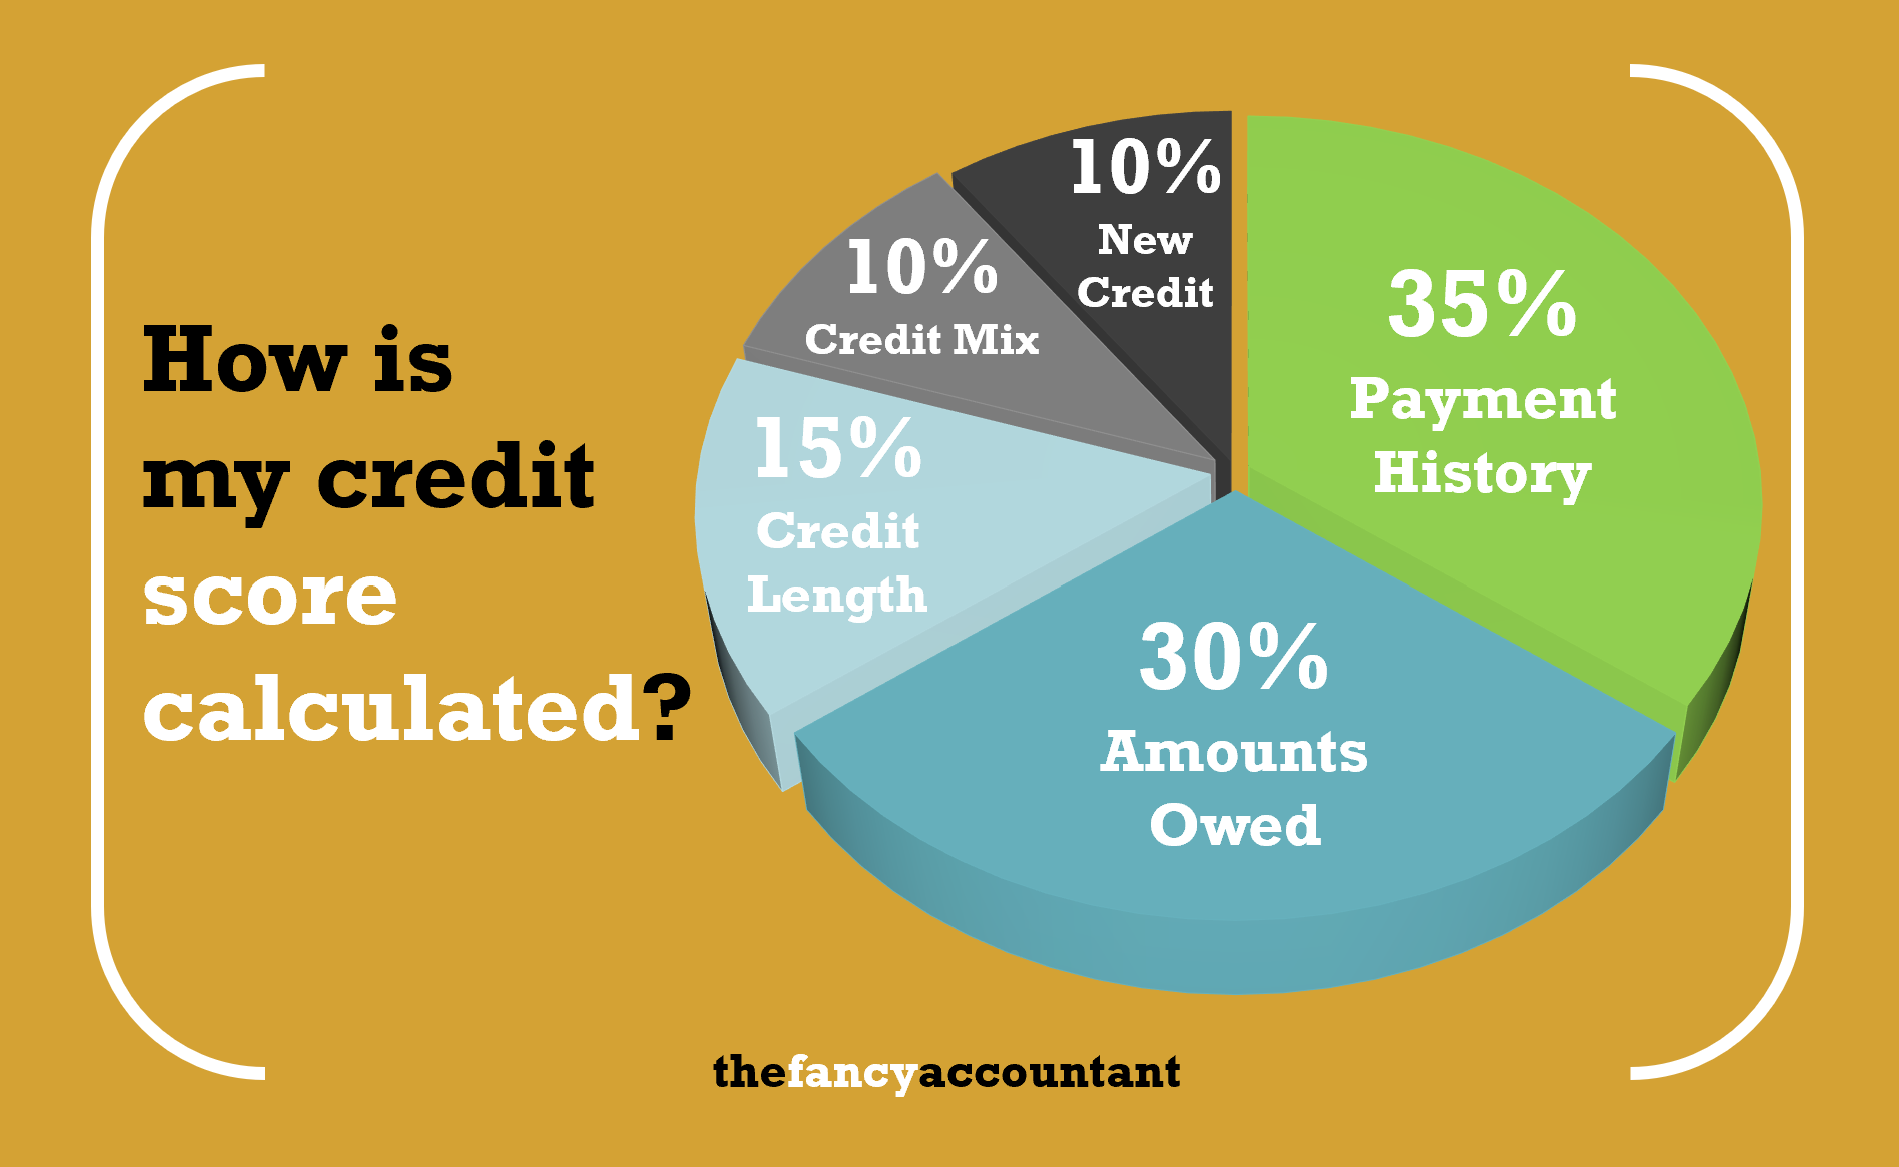 How to Calculate my Credit Score?